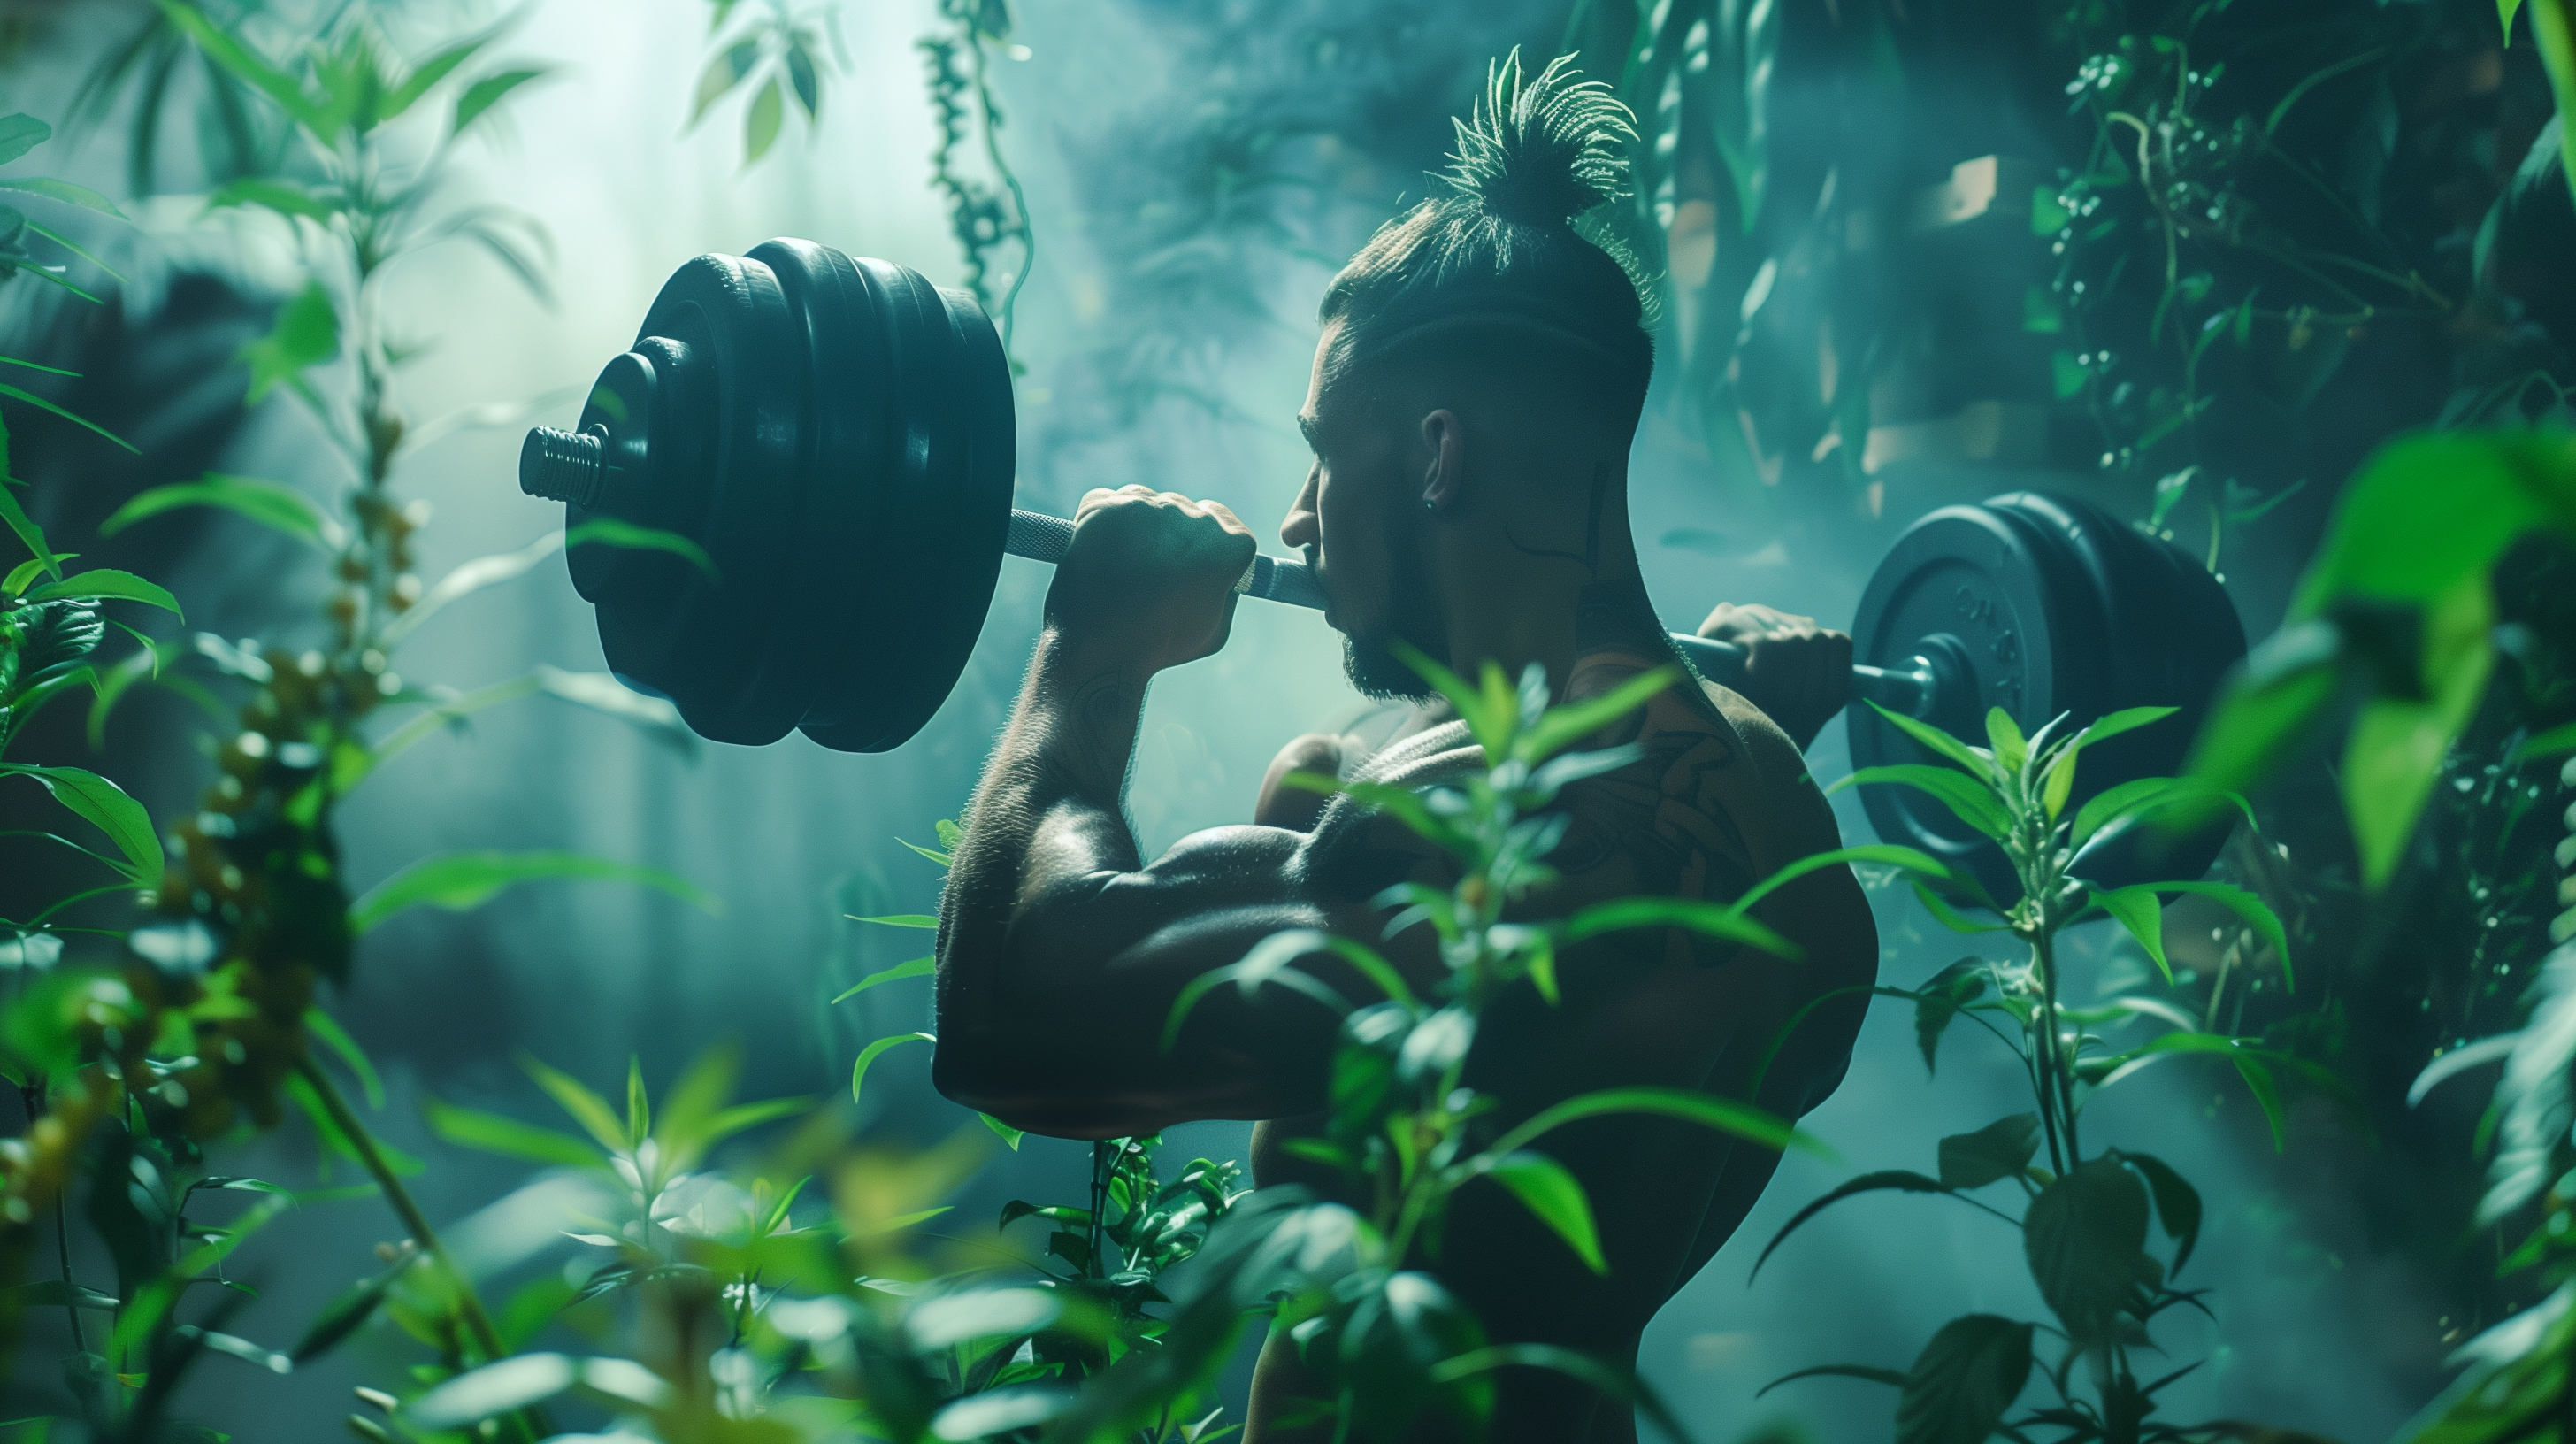 athlete lifting weights, surrounded by vibrant green plants